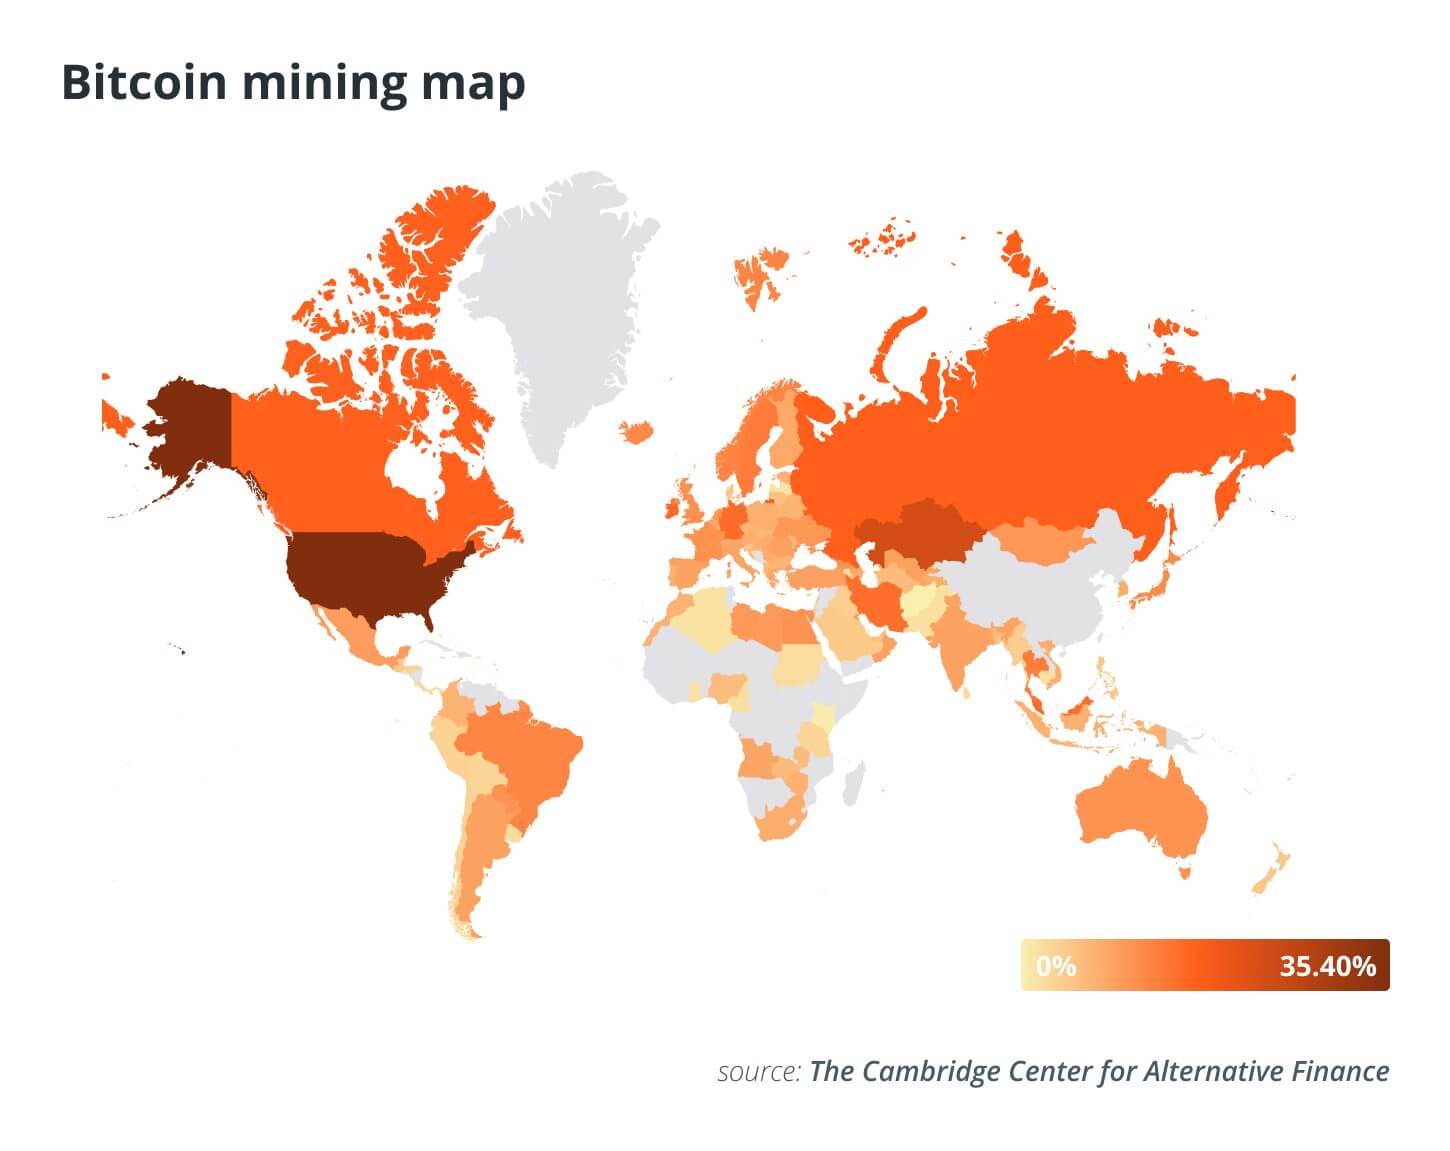 In which country is it more profitable to mine cryptocurrency?